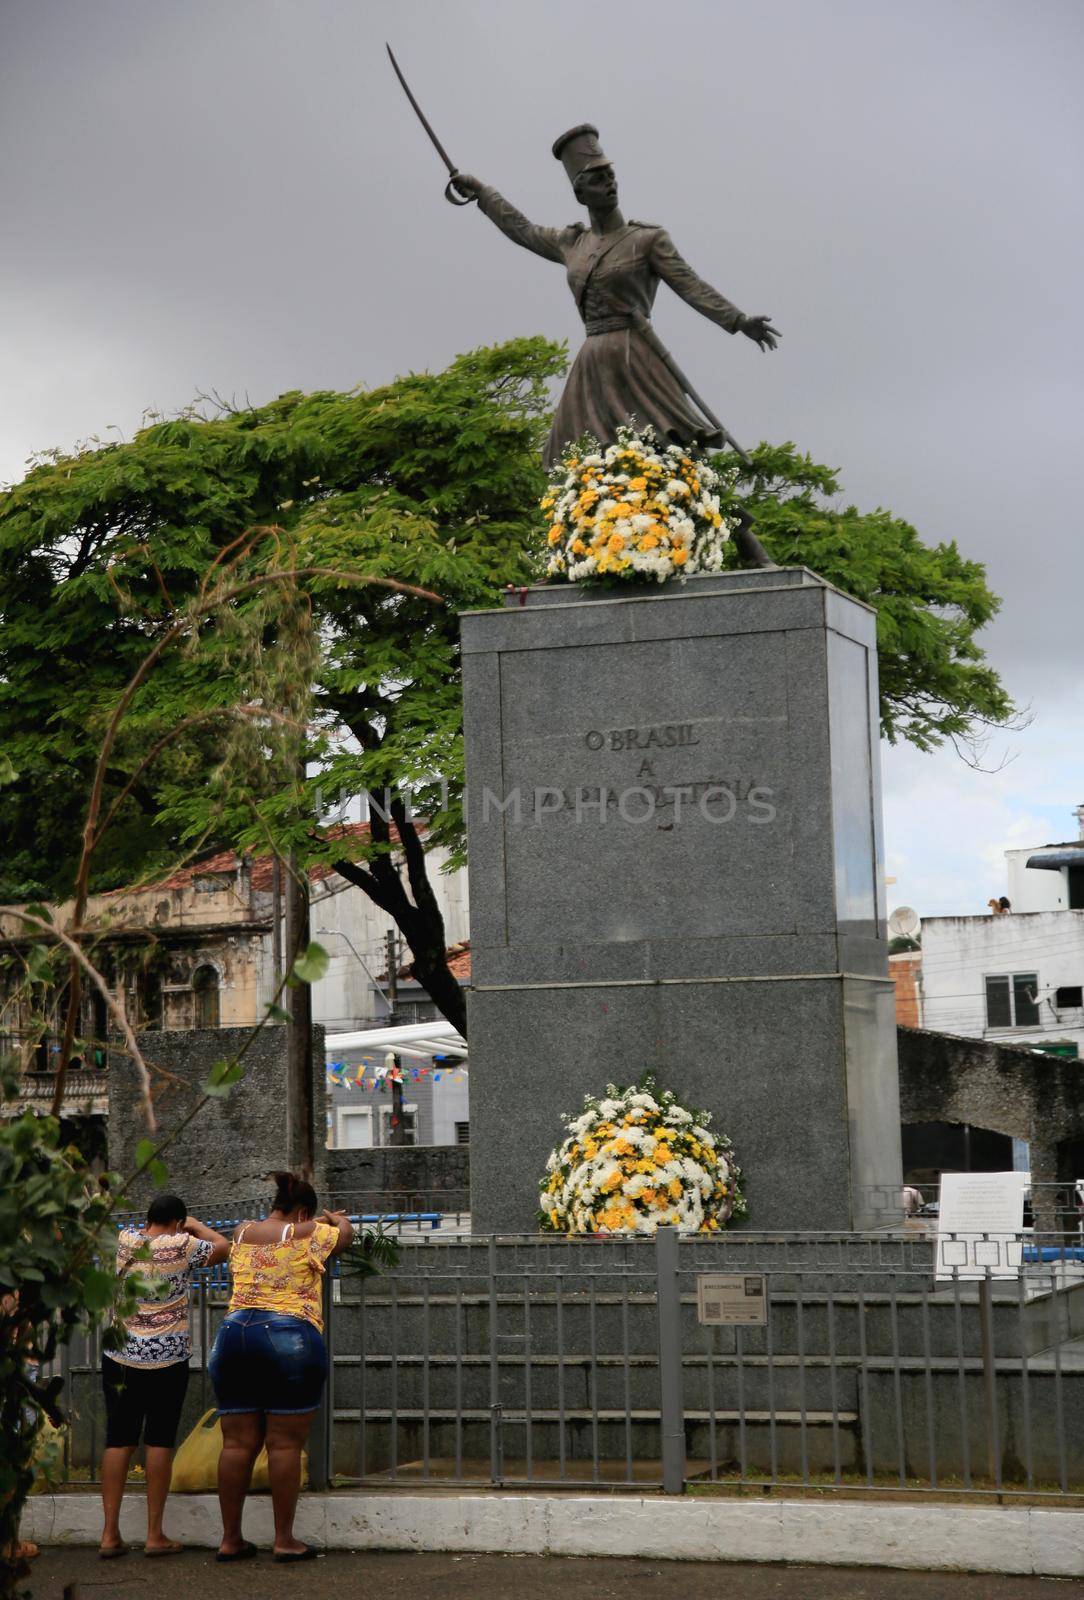 salvador, bahia, brazil - july 2, 2021: Monument to Maria Quiteria de Jesus, heroine of the struggles for independence of Bahia, is seen in the neighborhood of Lapinha, in the city of Salvador.